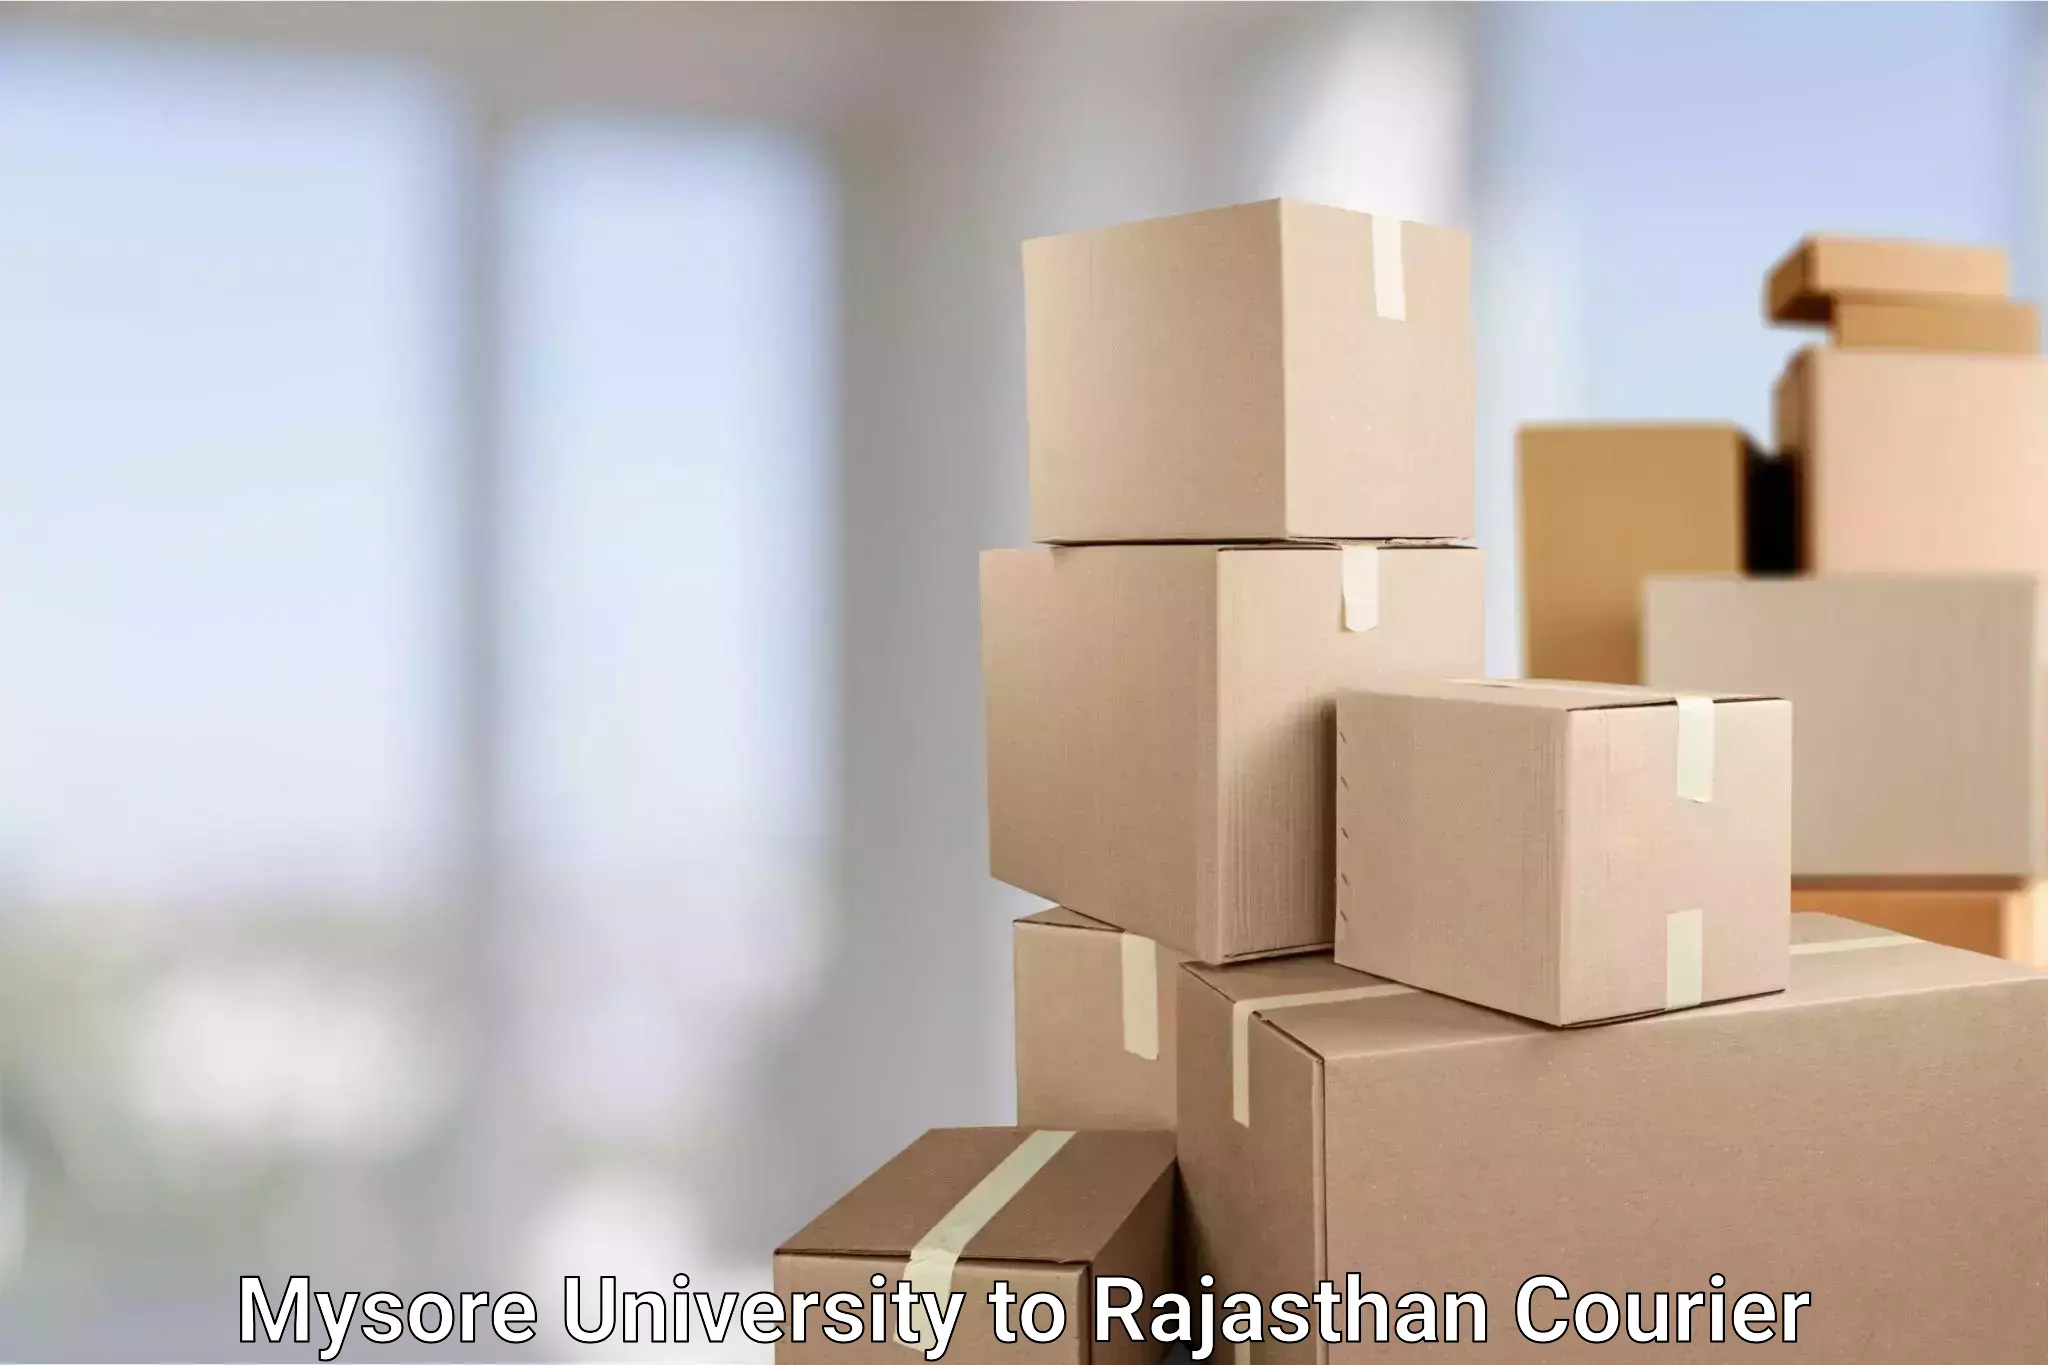 Express package delivery in Mysore University to Renwal